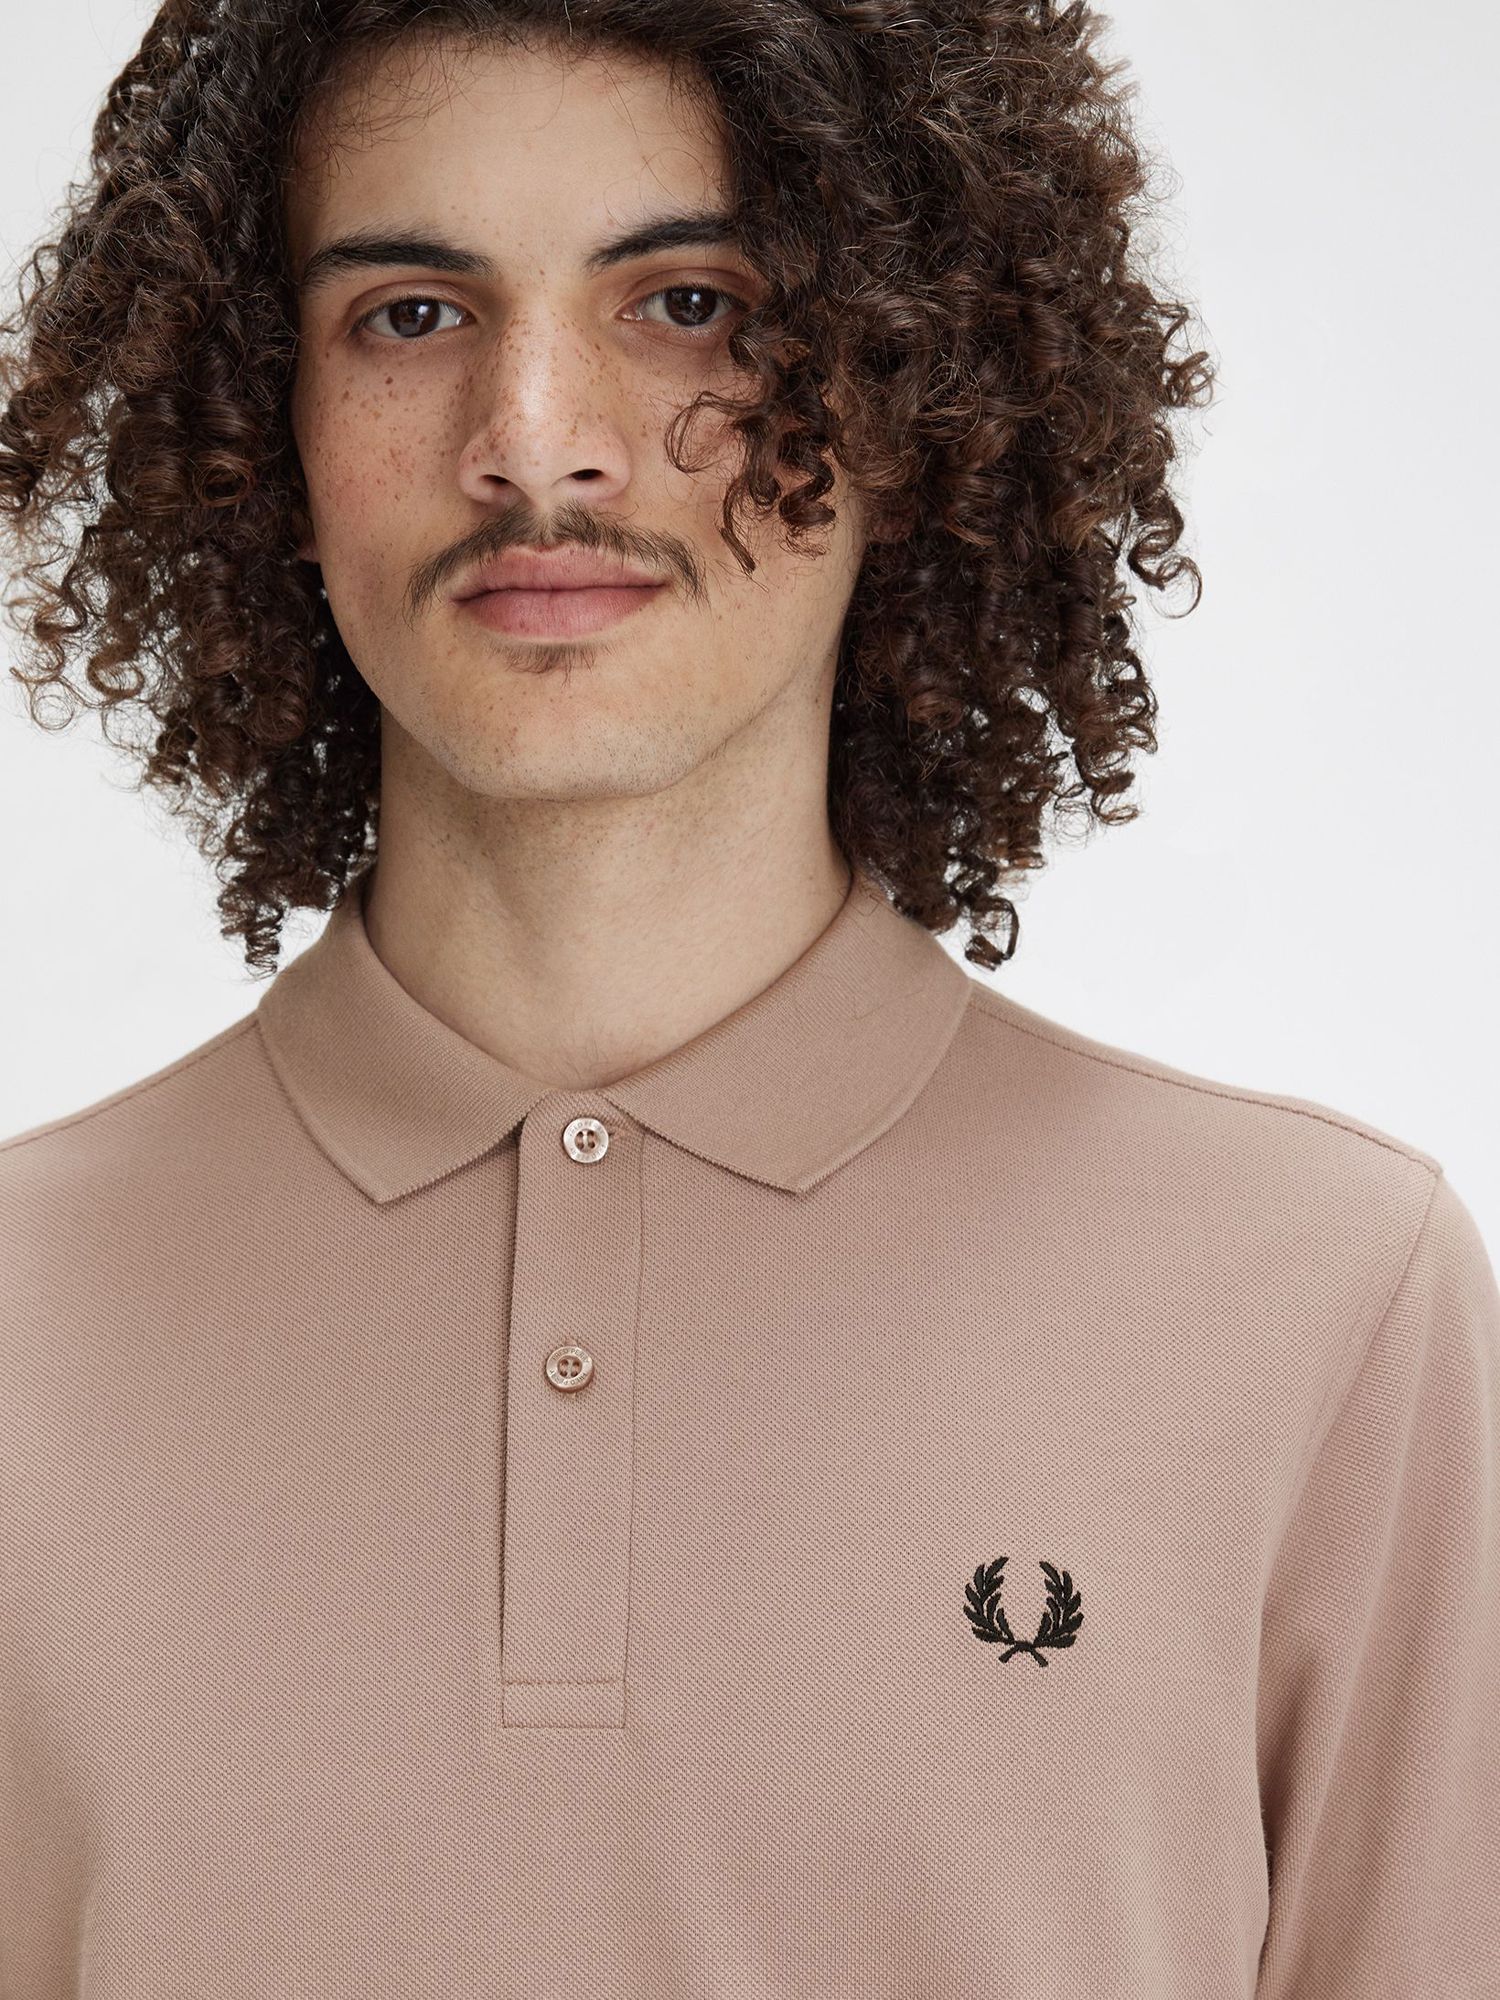 Buy Fred Perry Tennis Polo Shirt Online at johnlewis.com